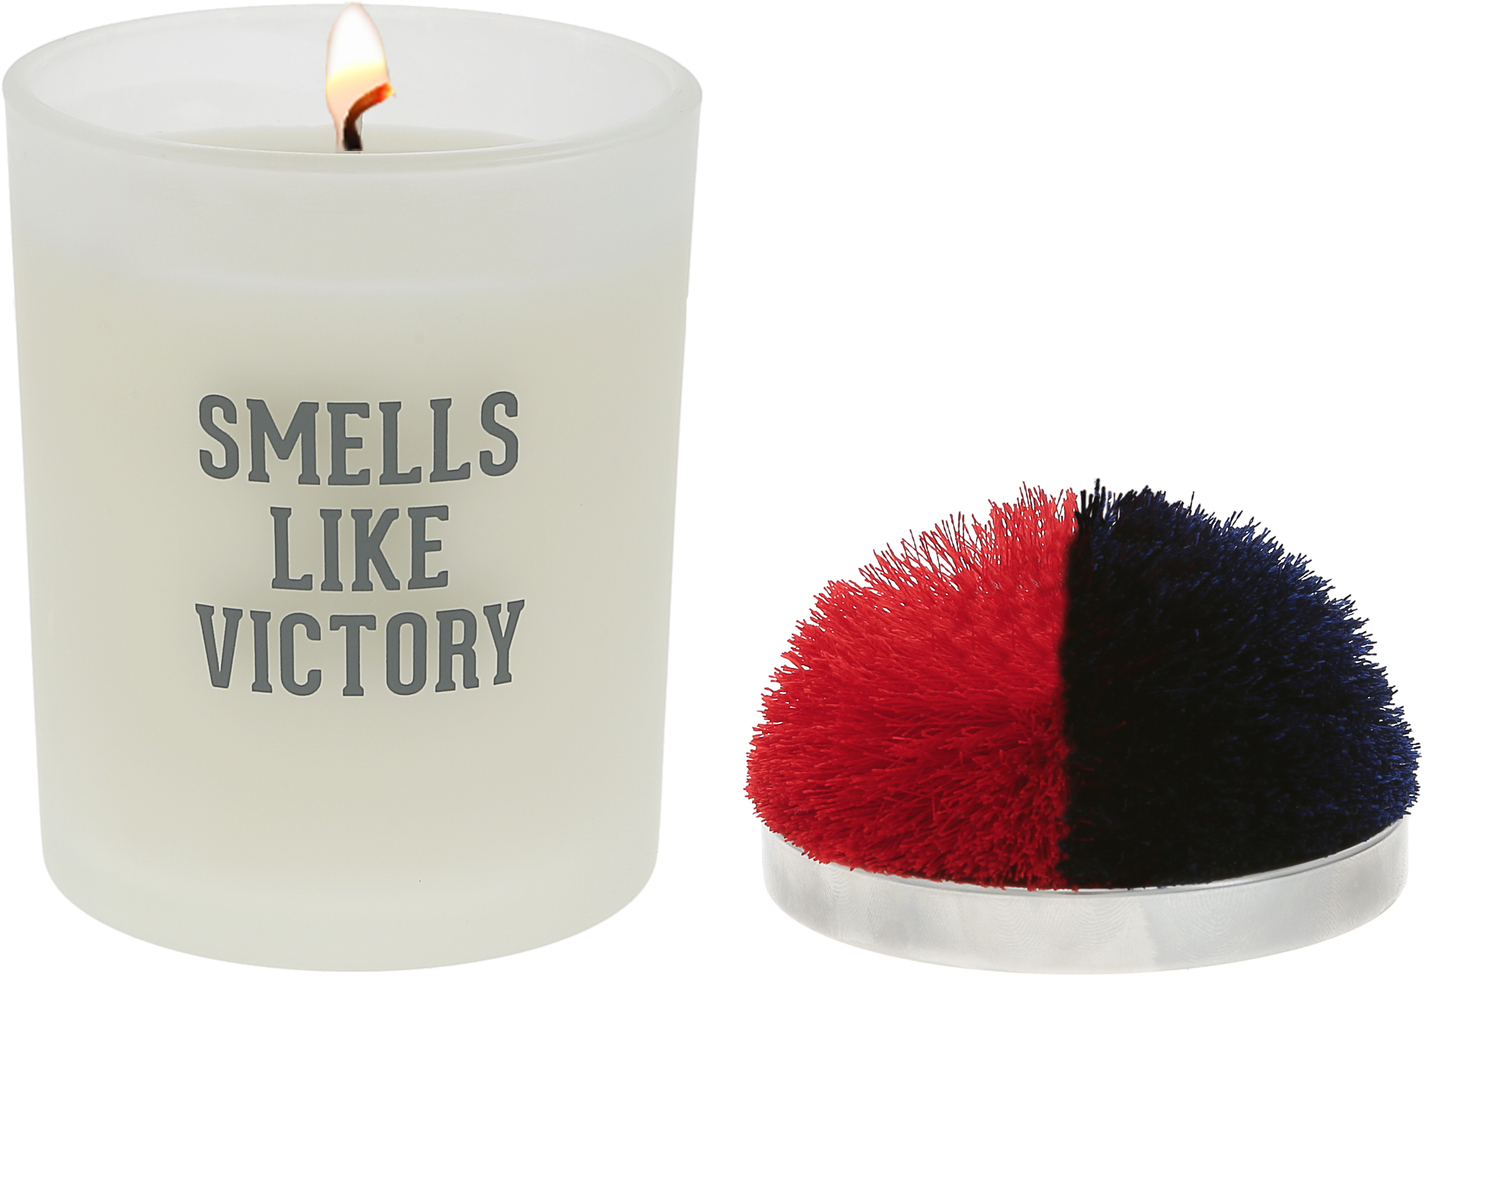 Victory - Red & Navy by Repre-Scent - Victory - Red & Navy - 5.5 oz - 100% Soy Wax Candle with Pom Pom Lid
Scent: Tranquility